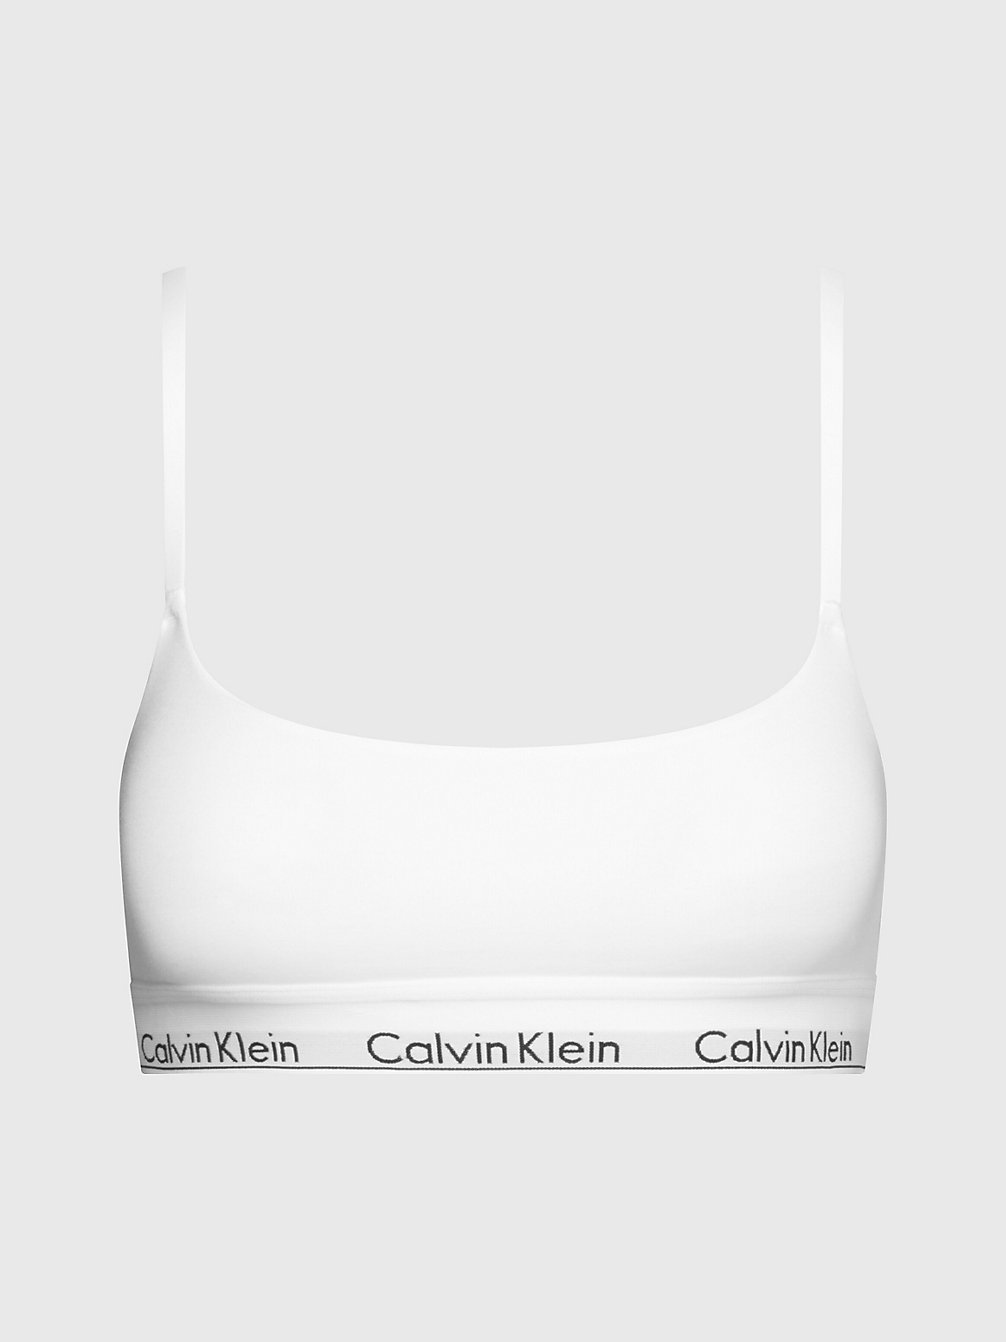 Corpiño - CK Deconstructed > WHITE > undefined mujer > Calvin Klein